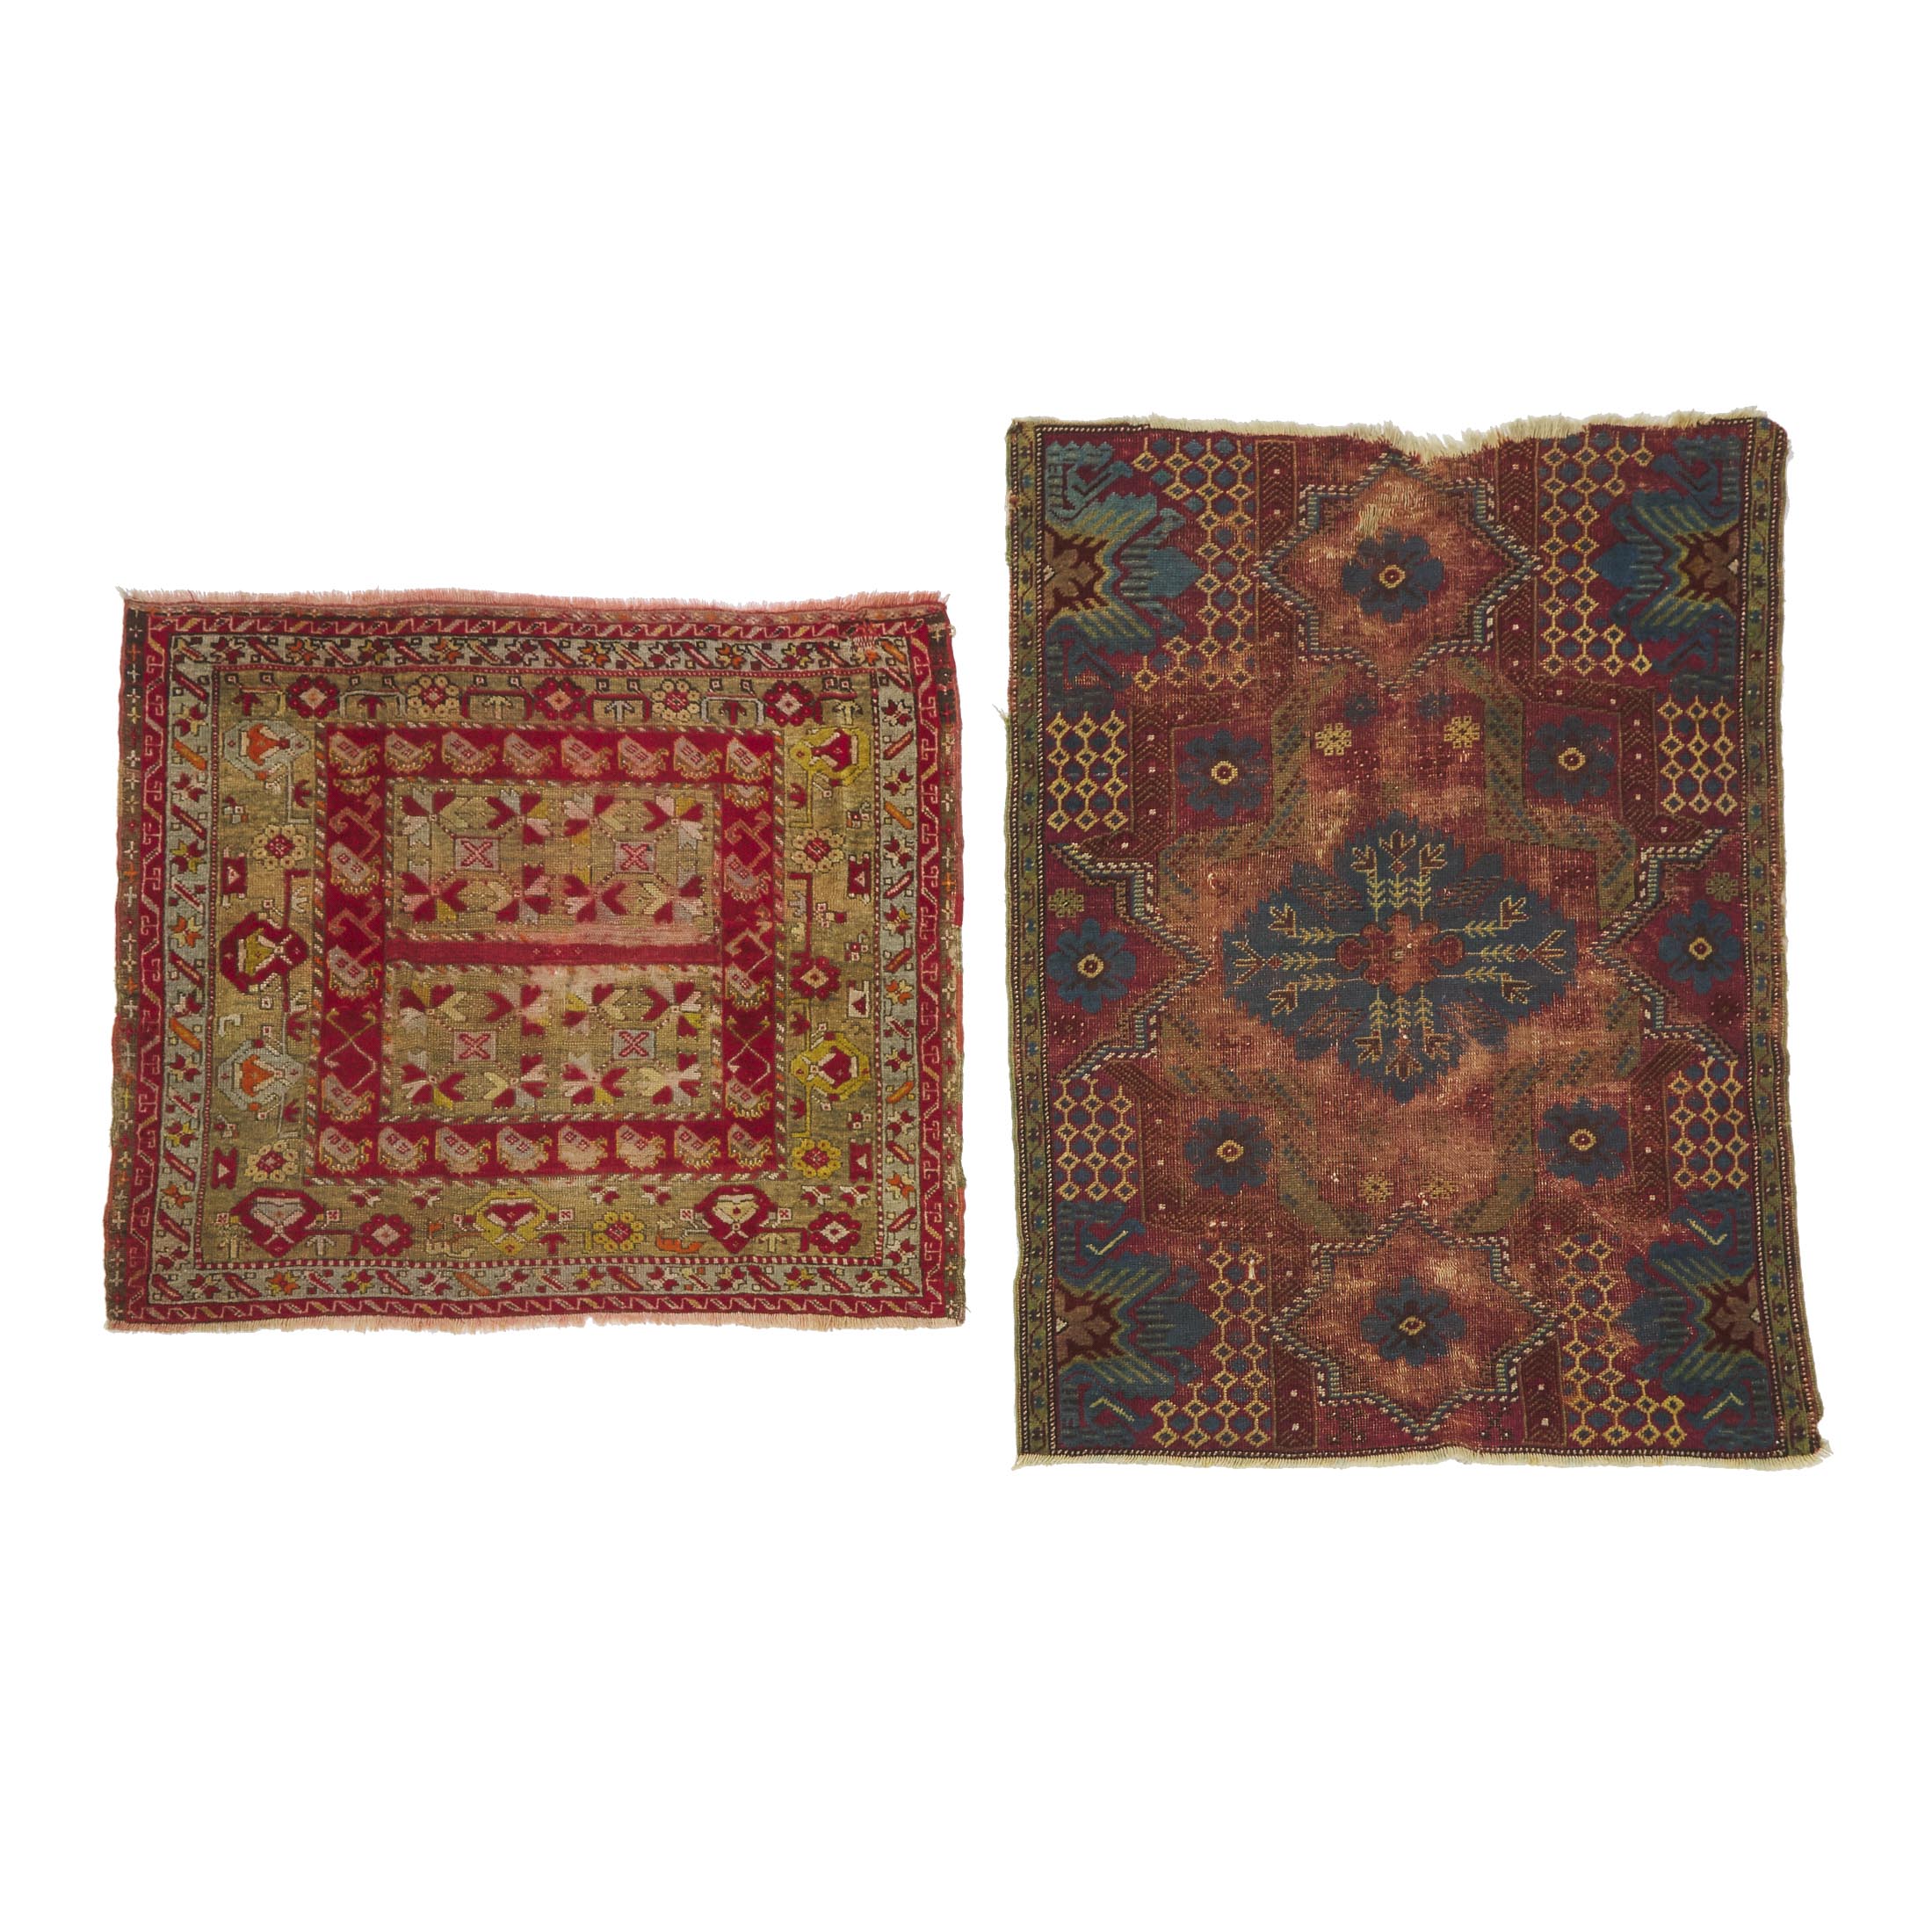 Two Central Anatolian Rug Fragments including a Armenian Sivas Rug, c.1900 together with a Kirsehir Rug, c.1890